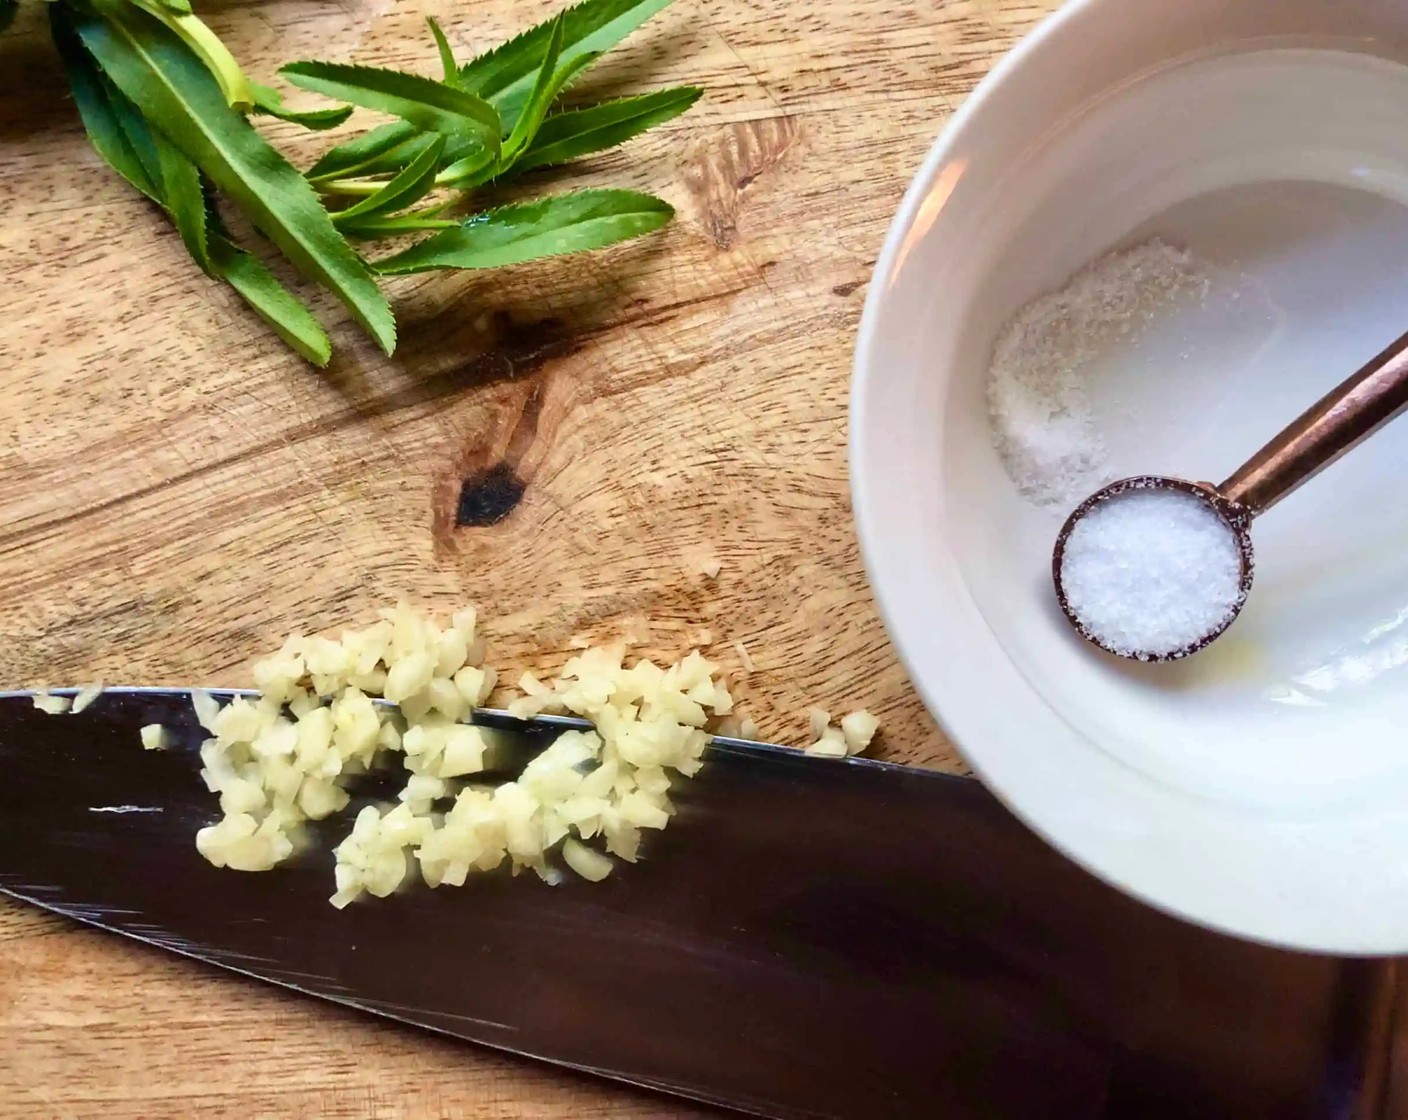 step 1 To make a garlic paste, mince the Garlic (2 cloves) and Fine Sea Salt (1/4 tsp) together, then press down on the garlic with the side of your knife. Move the side of the knife back and forth against the garlic and salt until a paste forms.